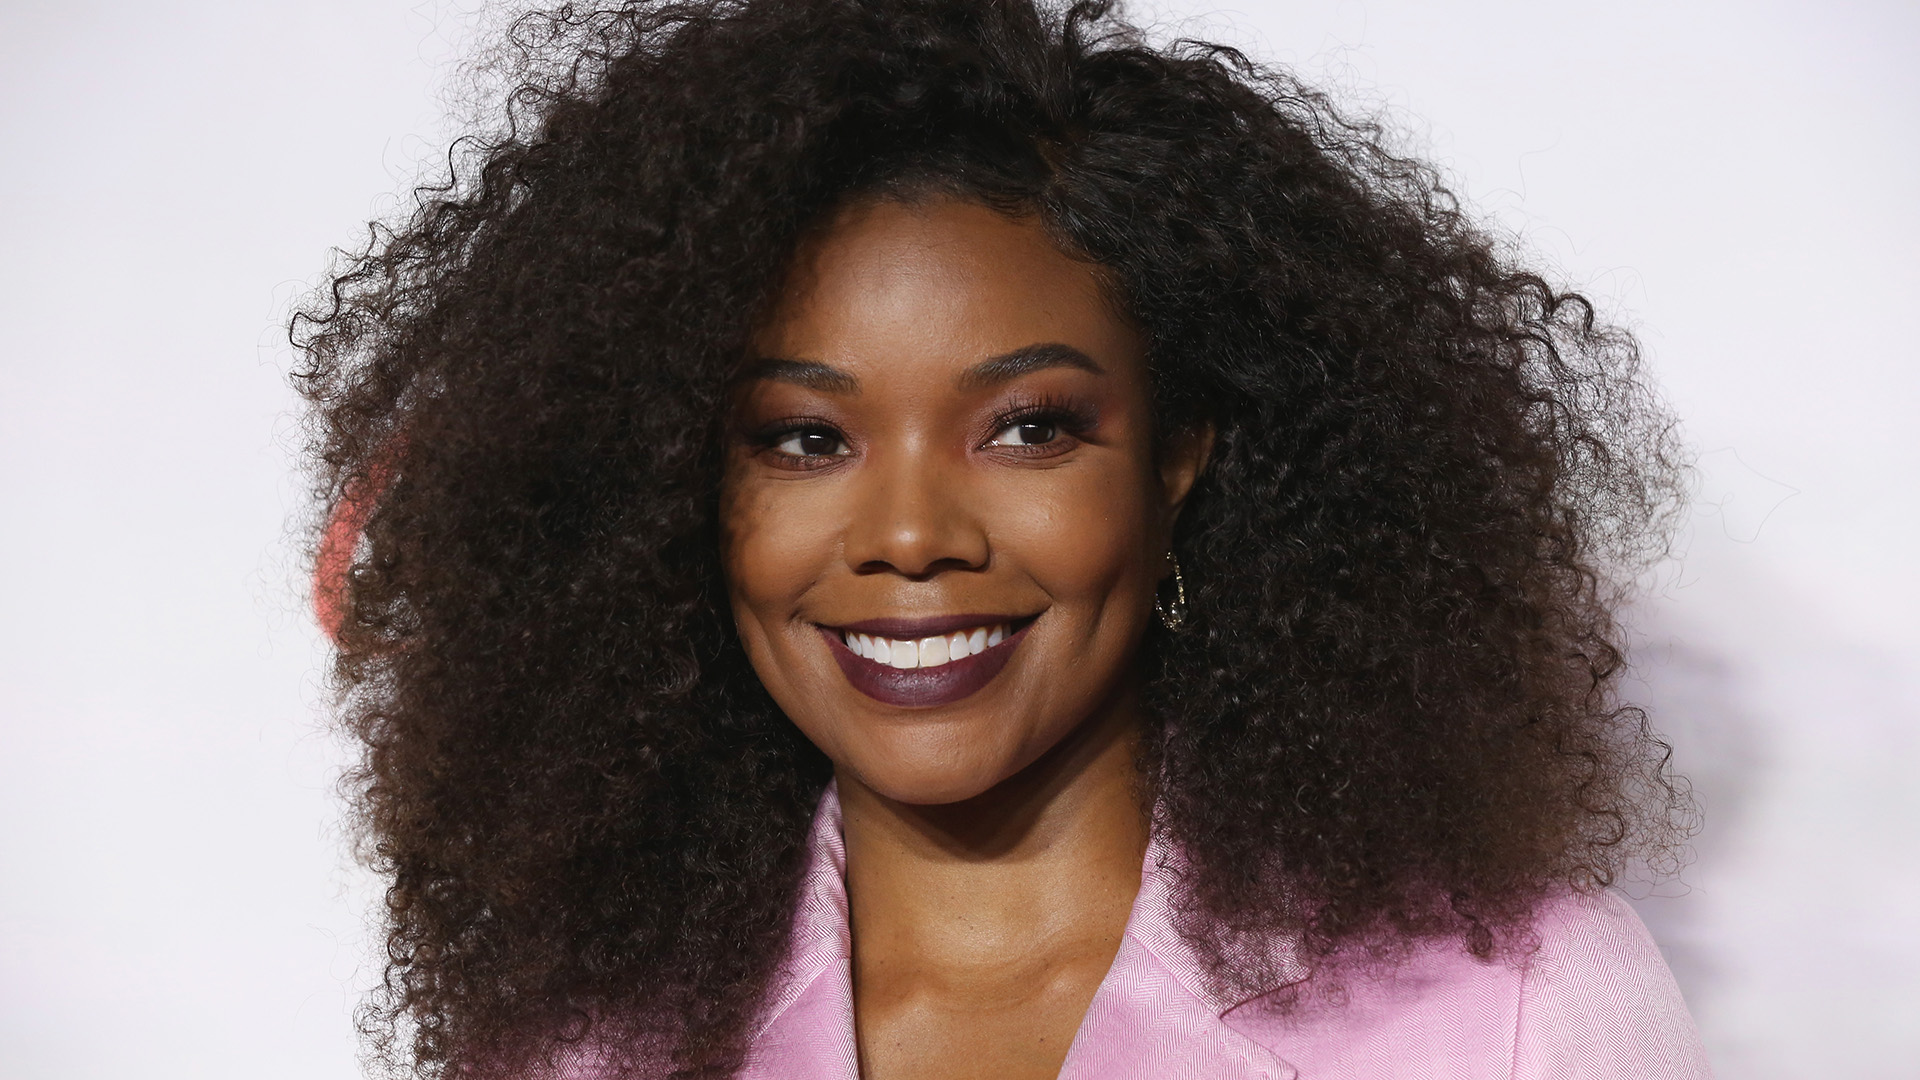 Simon Cowell Gabrielle Union: What Actually Happened? • Daily Feed